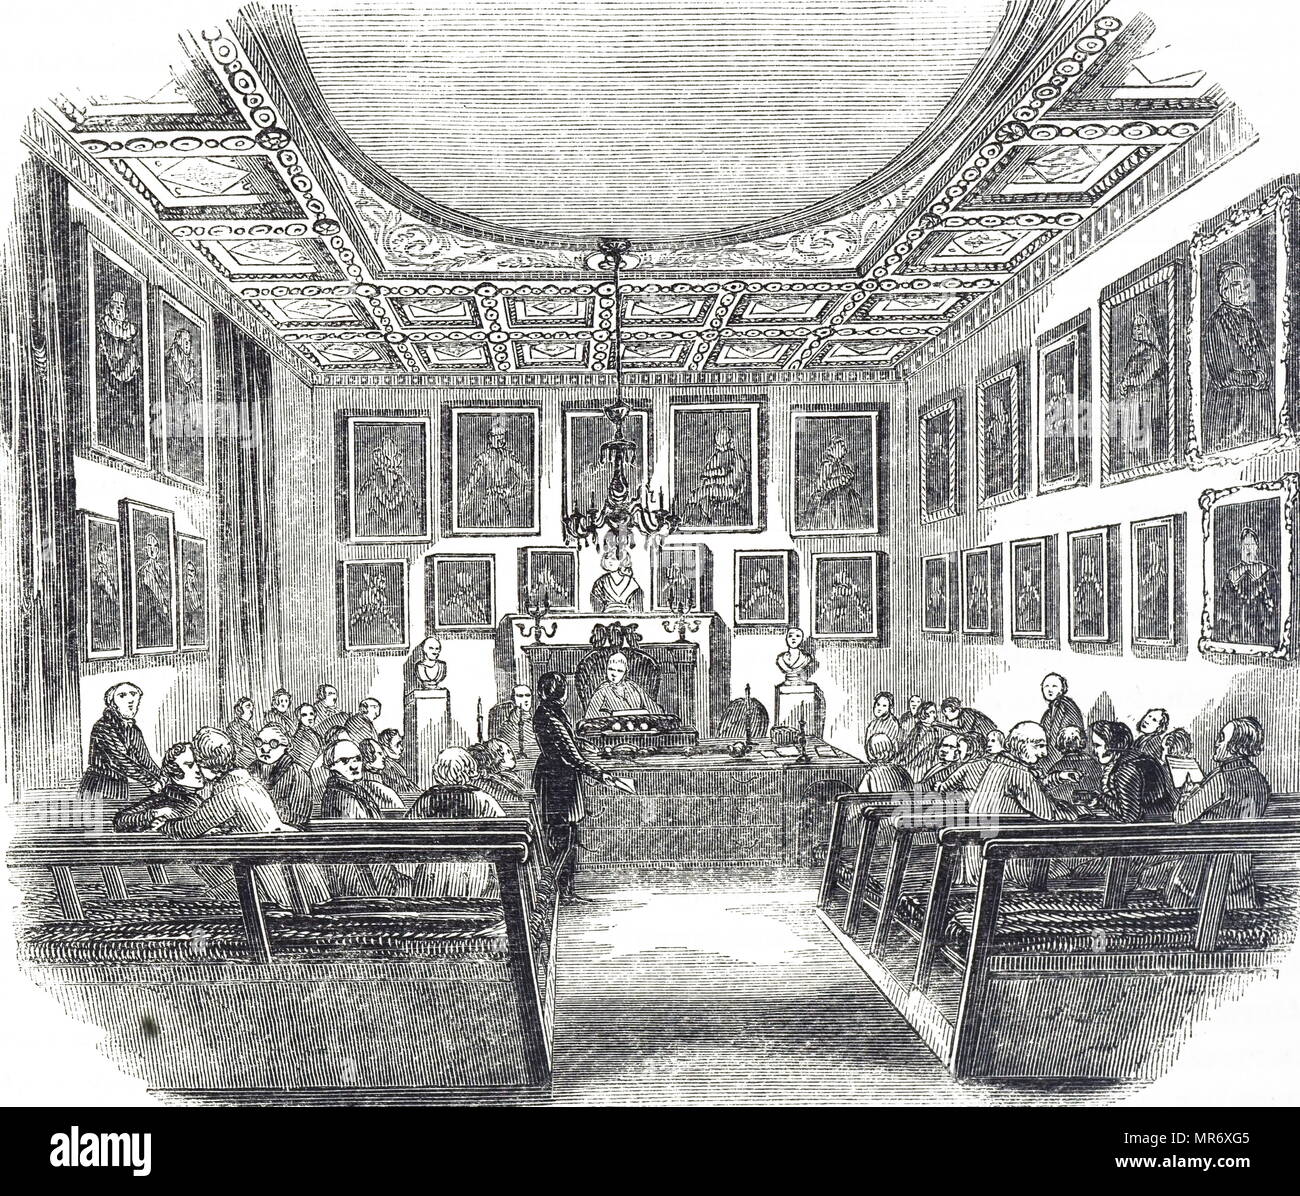 Engraving depicting a meeting of the Royal Society in Somerset House, London. Dated 19th century Stock Photo